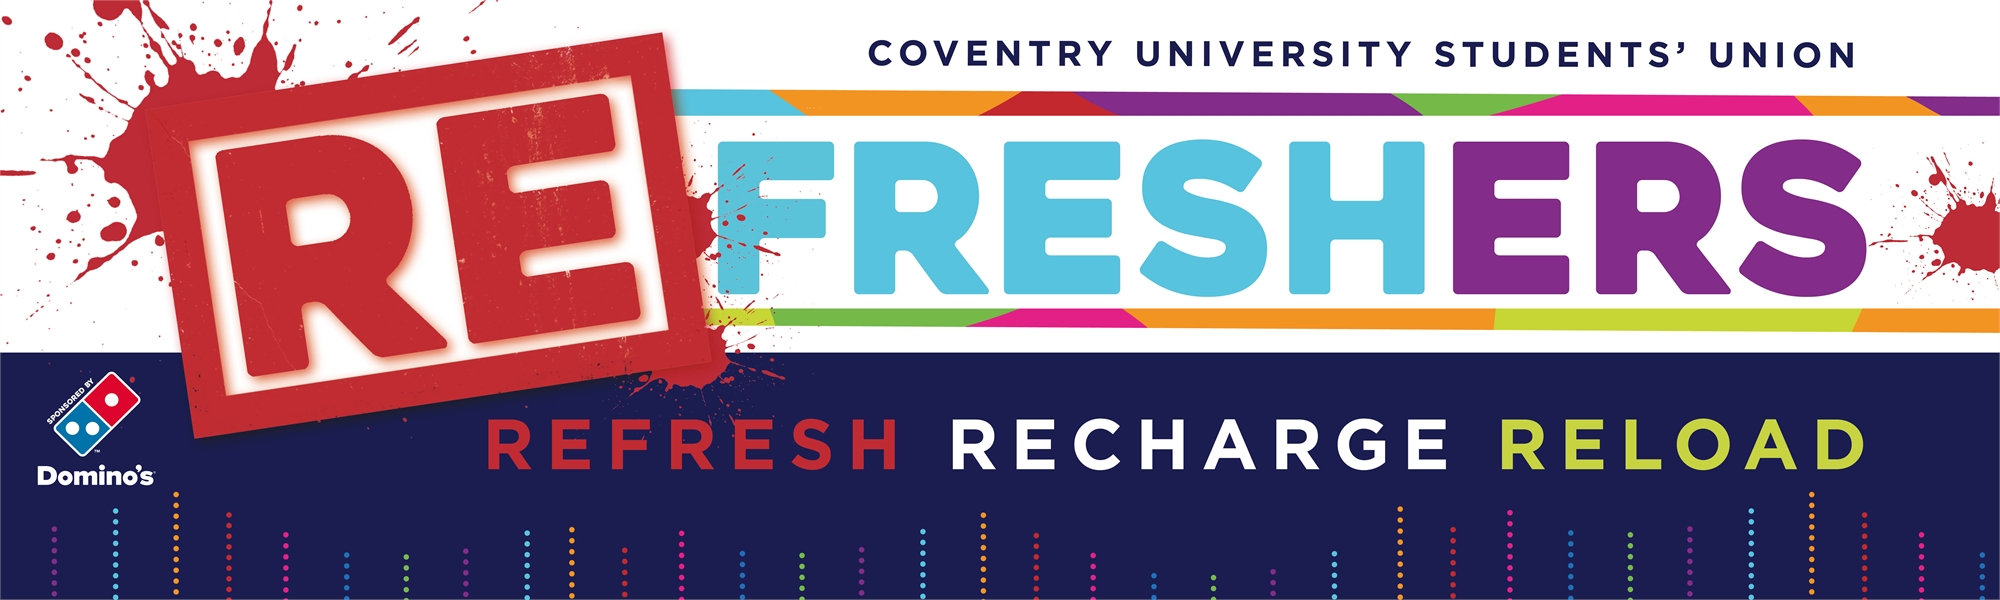 Refreshers-Web-Banner-2017